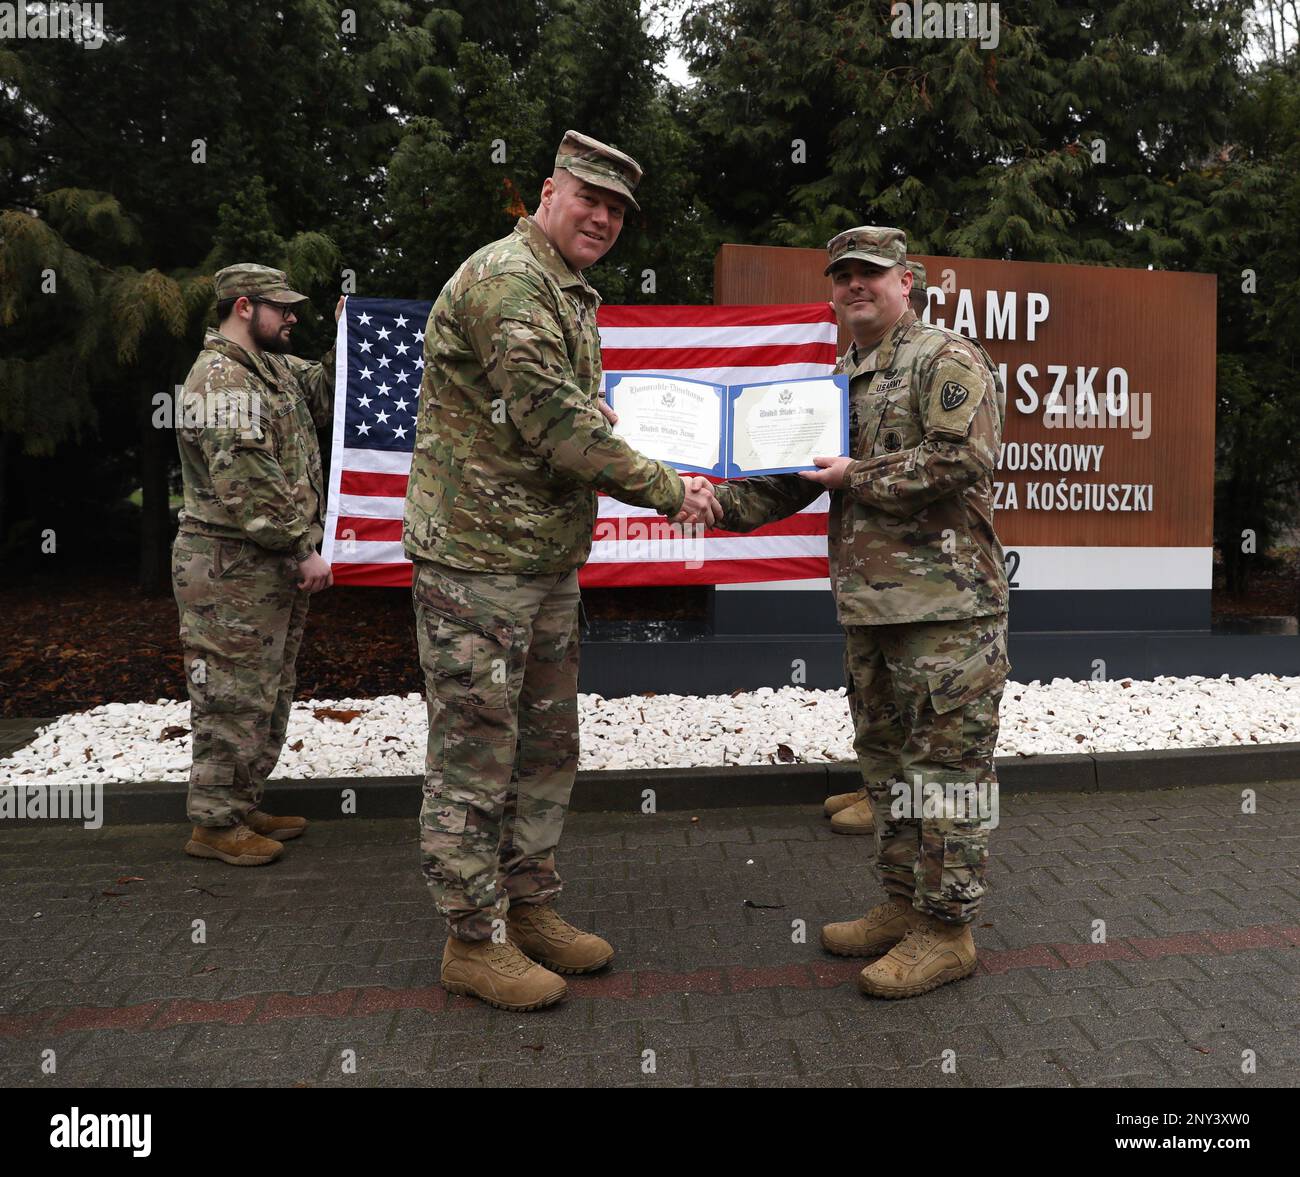 U.S. Army Maj. Gen. Christopher G. Beck, deputy commanding general of maneuver for the III Armored Corps, and Sgt. First Class Kenneth Lane, Alpha Company, 303rd Military Intelligence Battalion, 504th Military Intelligence Brigade, pose for a photo, during a reenlistment ceremony at Camp Kosciuszko, Poznan, Poland, Jan. 9, 2023. III Armored Corps is the world's premier mounted force, highly lethal, trained and ready to conduct sustained, expeditionary, operational maneuver anywhere in the world. Stock Photo